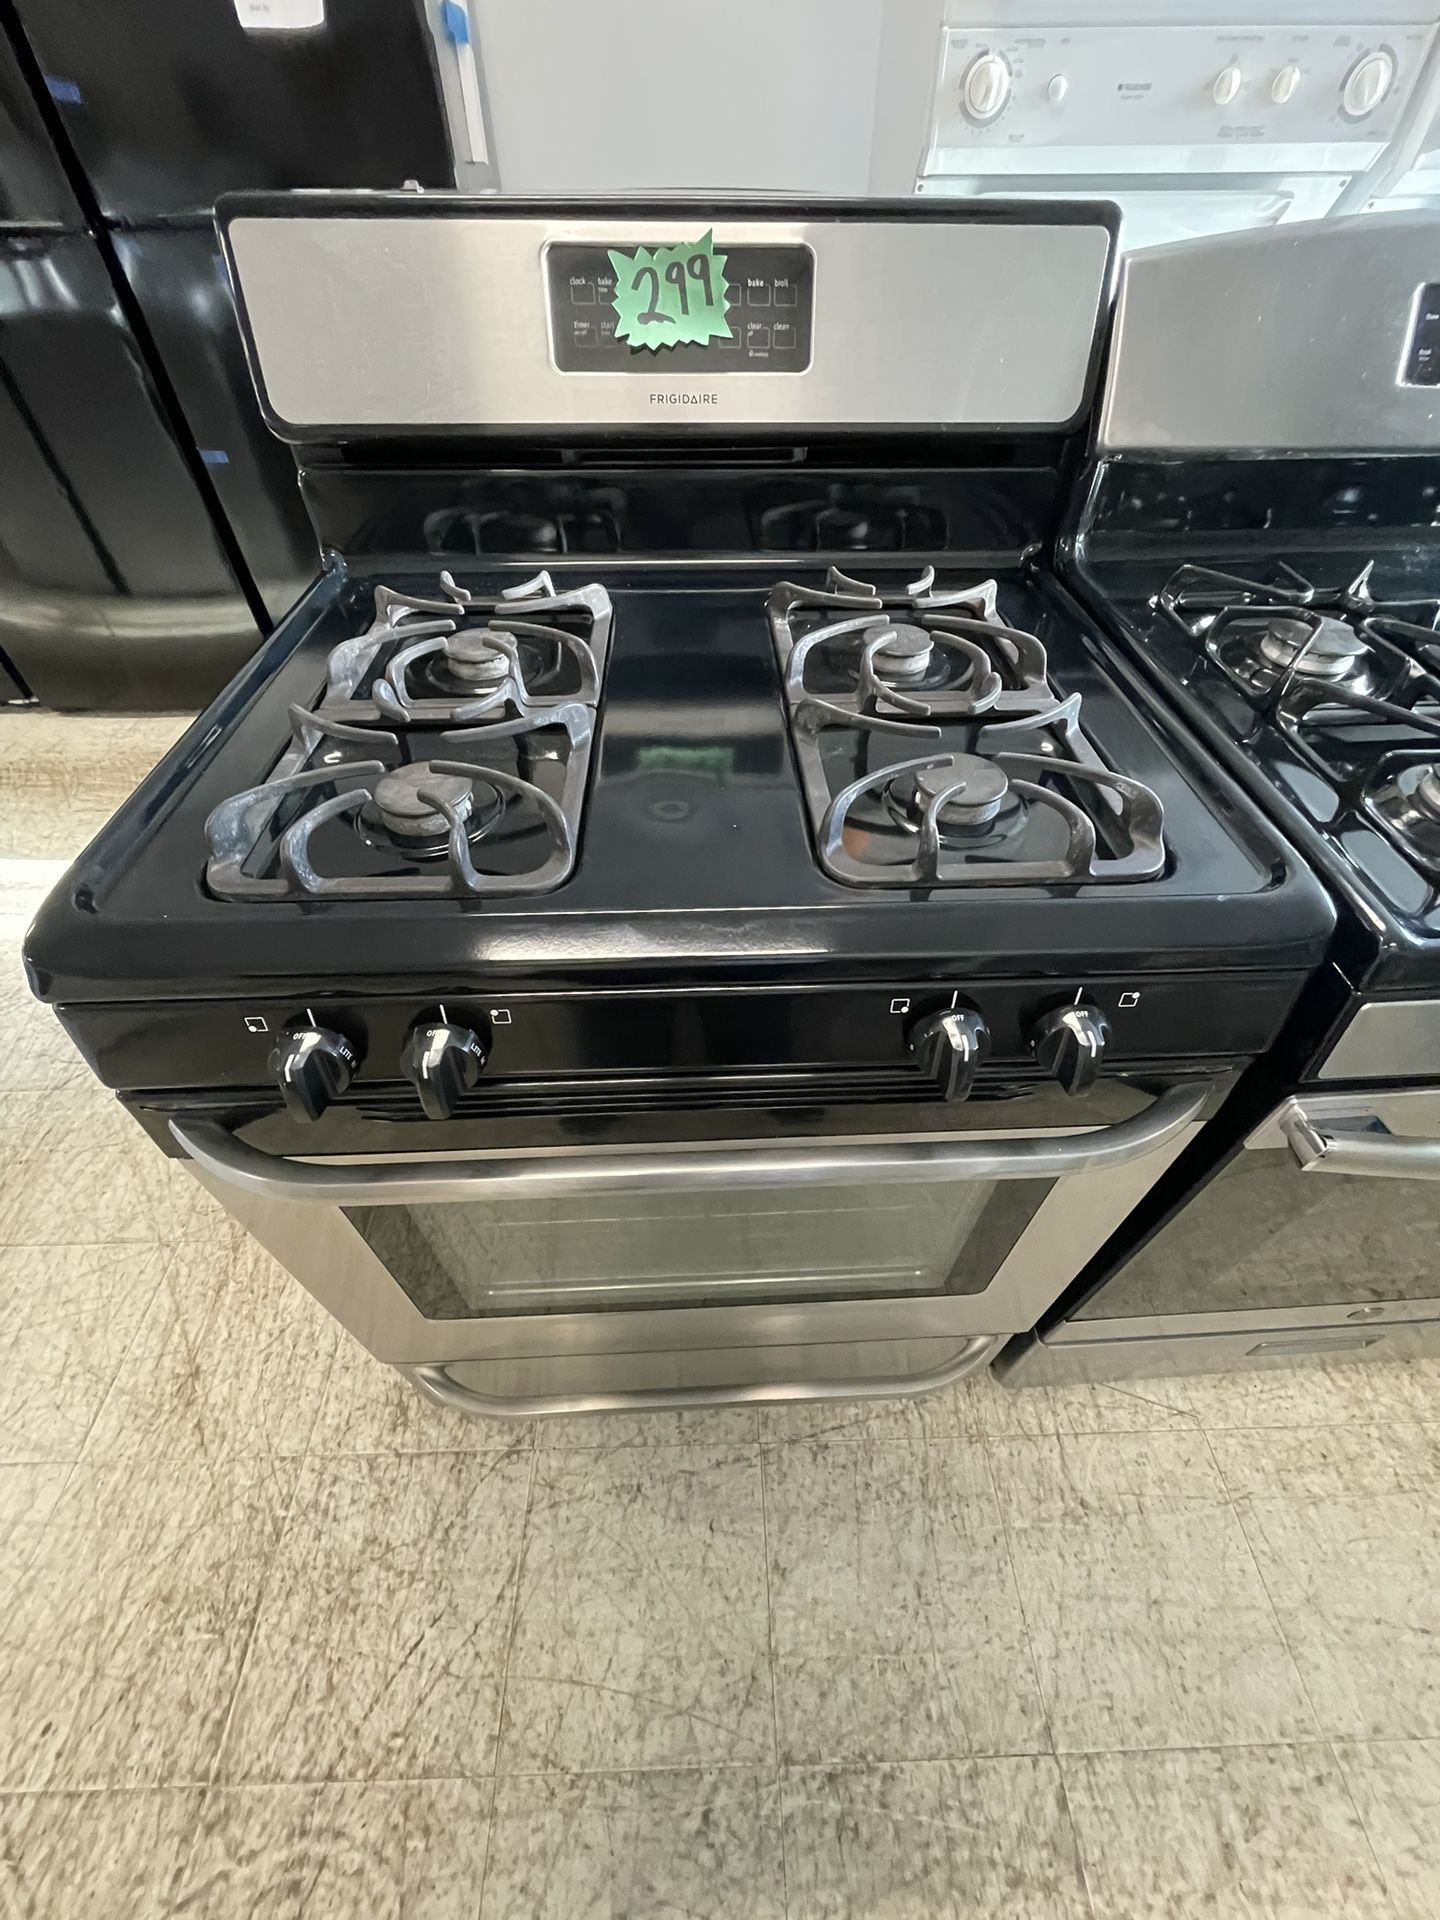 Frigidaire Gas Stove Used In Good Condition With 90days Warranty 